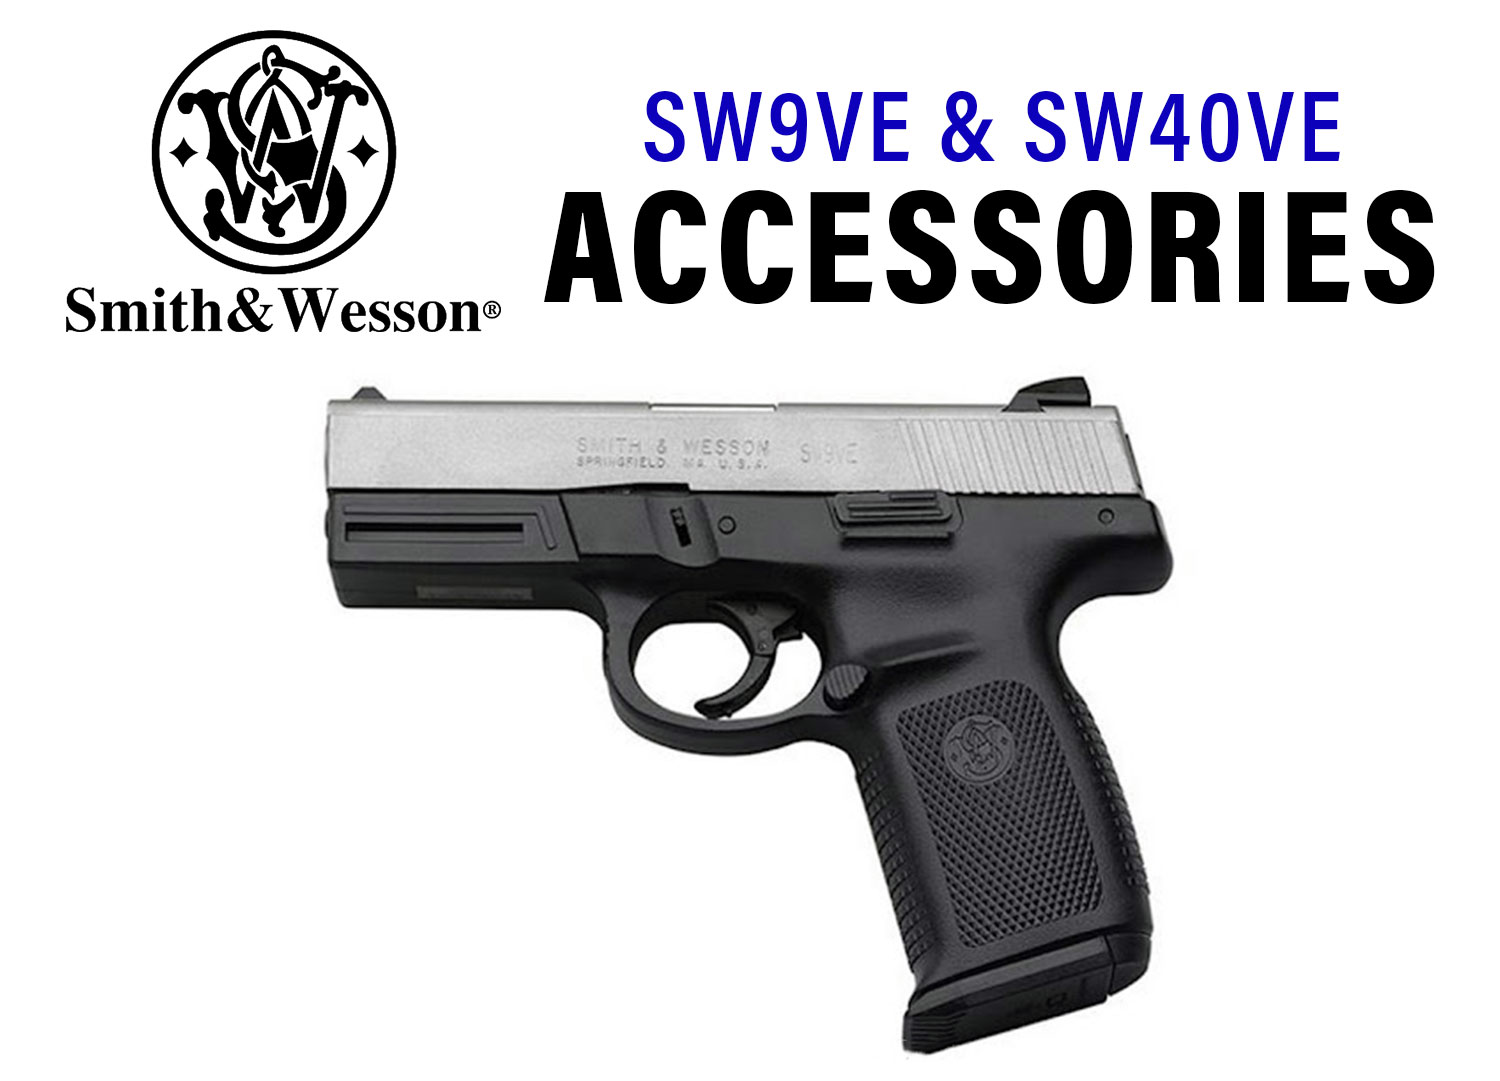 Smith and Wesson SW9VE & SW40VE Accessories